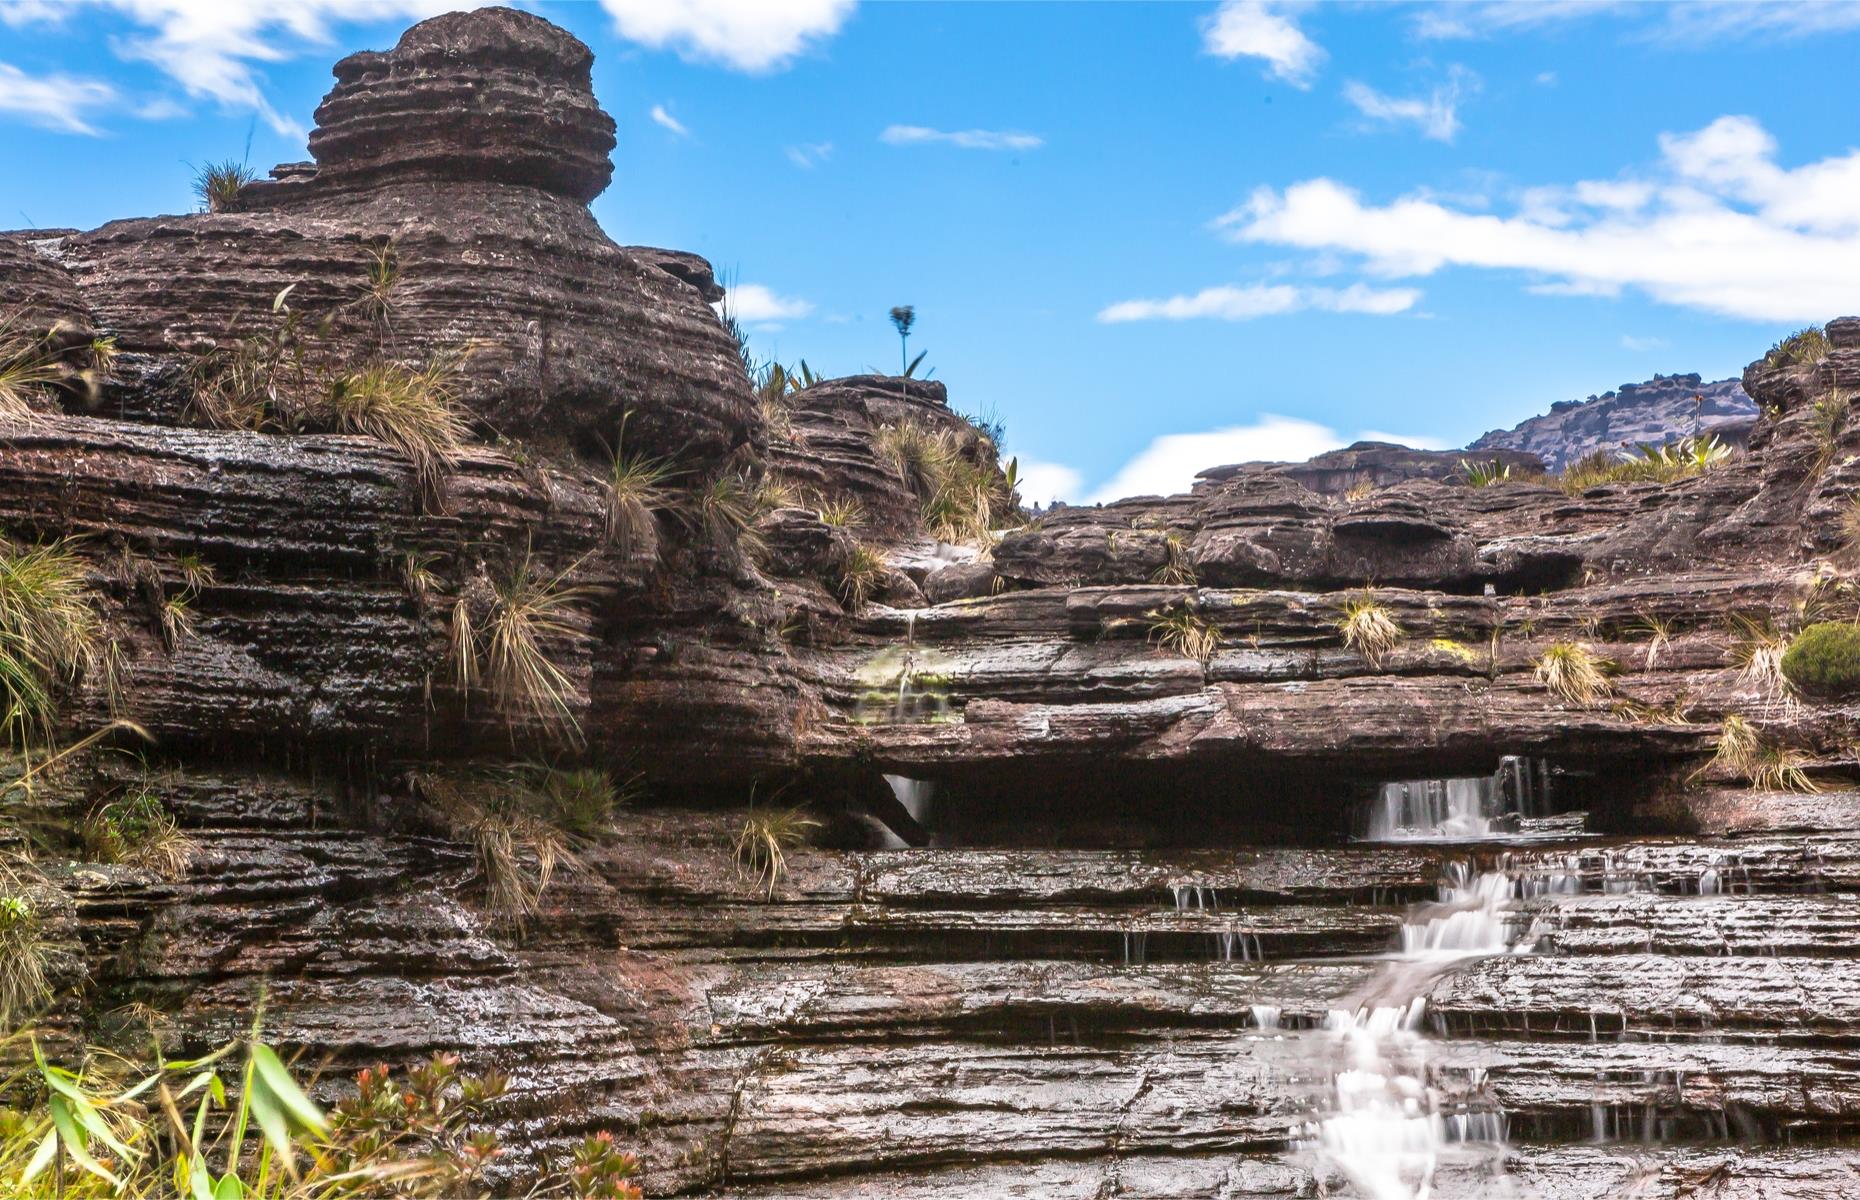 <p>The peak of Mount Roraima is often shrouded in cloud, and local indigenous tribes once believed it was home to the mother goddess. Located in Venezuela, close to the border with Brazil, the remote mountain can be explored on a week-long hike with a guide.</p>